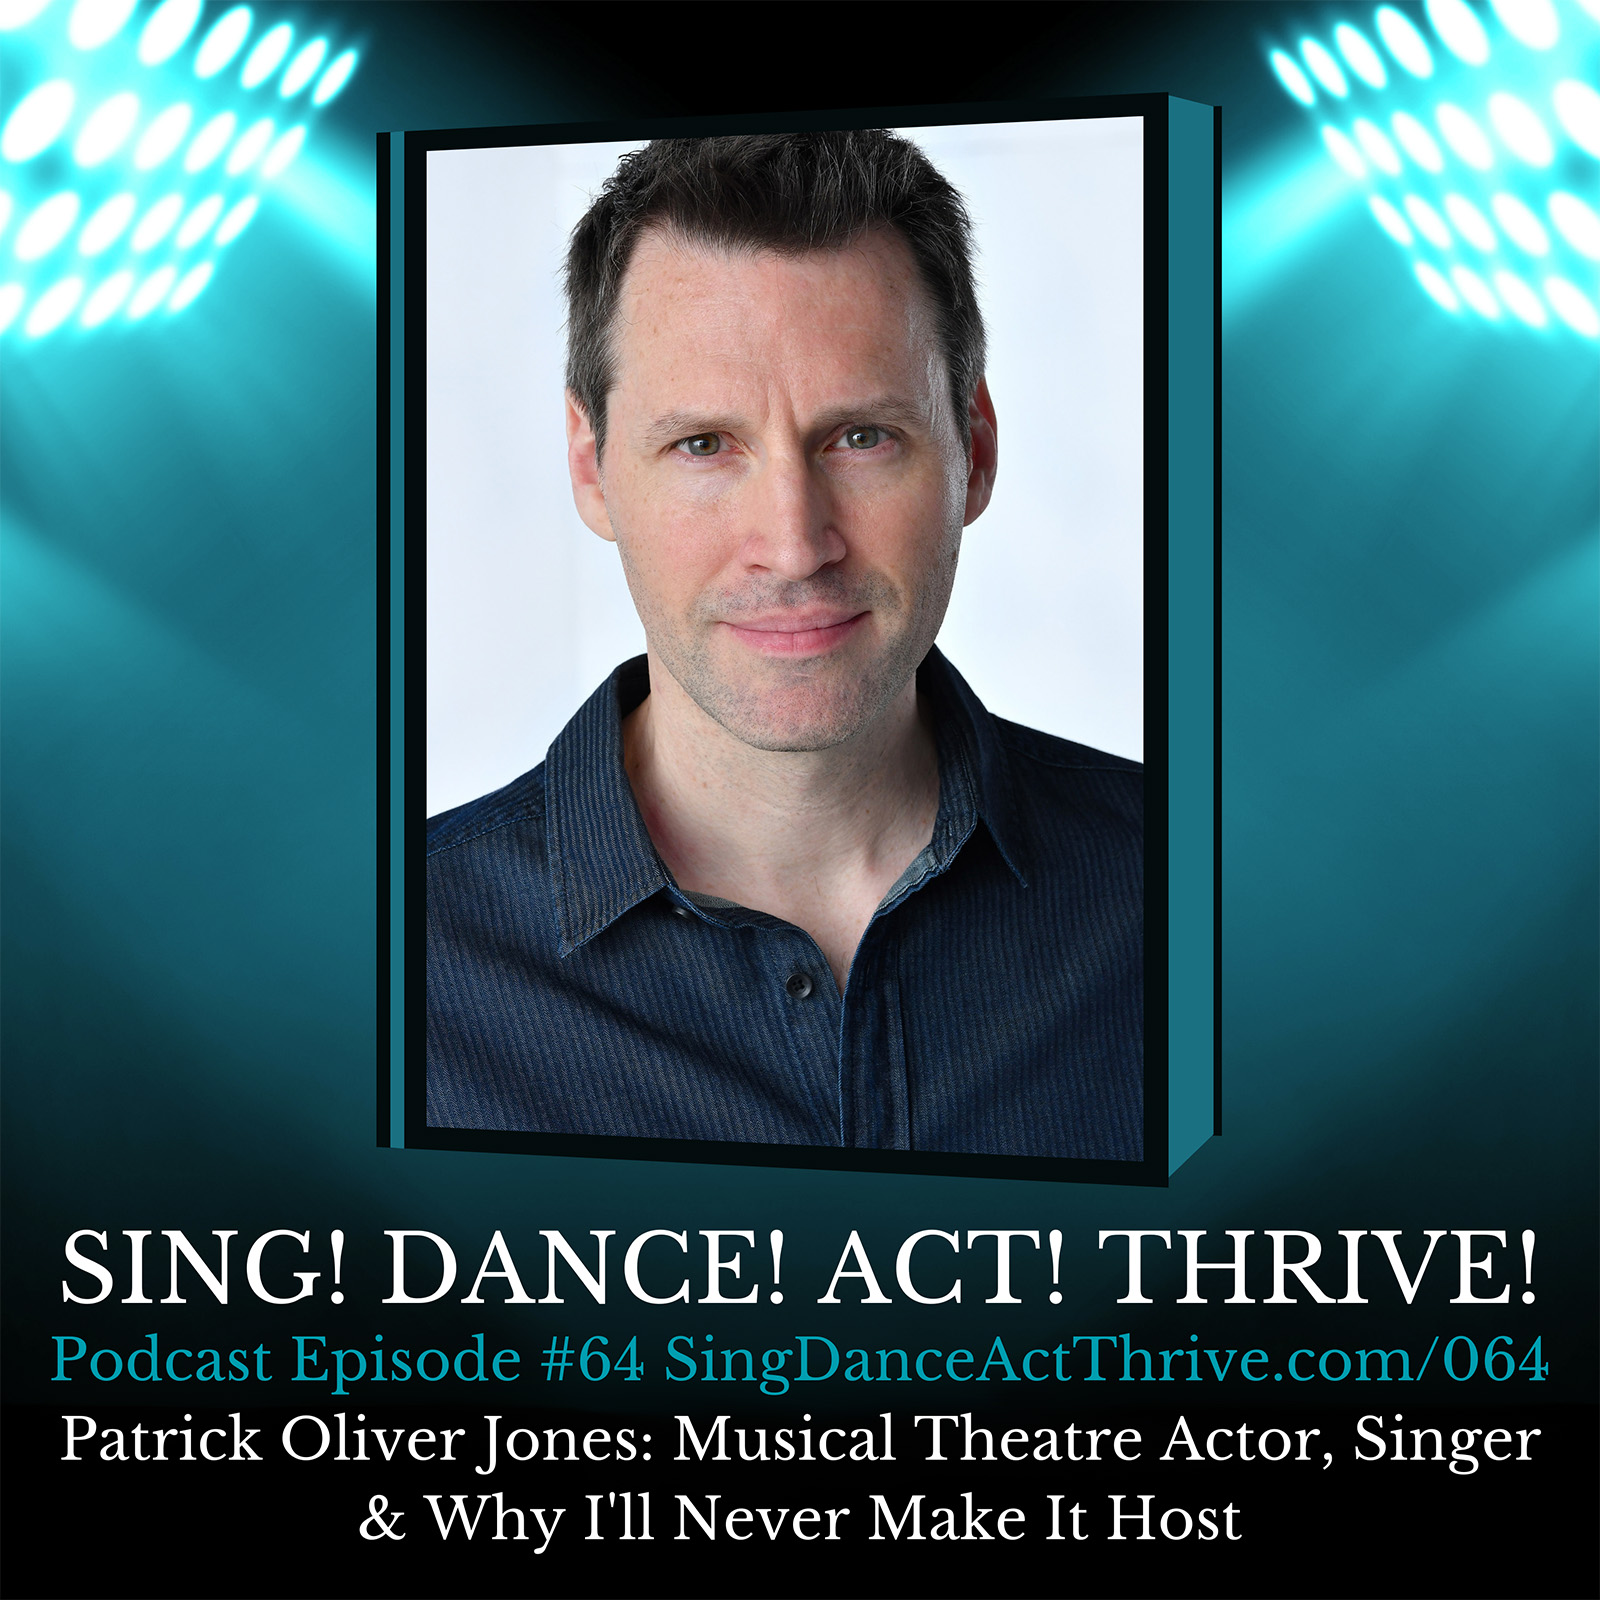 Musical-Theatre-Actor-Singer-Patrick-Oliver-Jones-Sing-Dance-Act-Thrive-Podcast